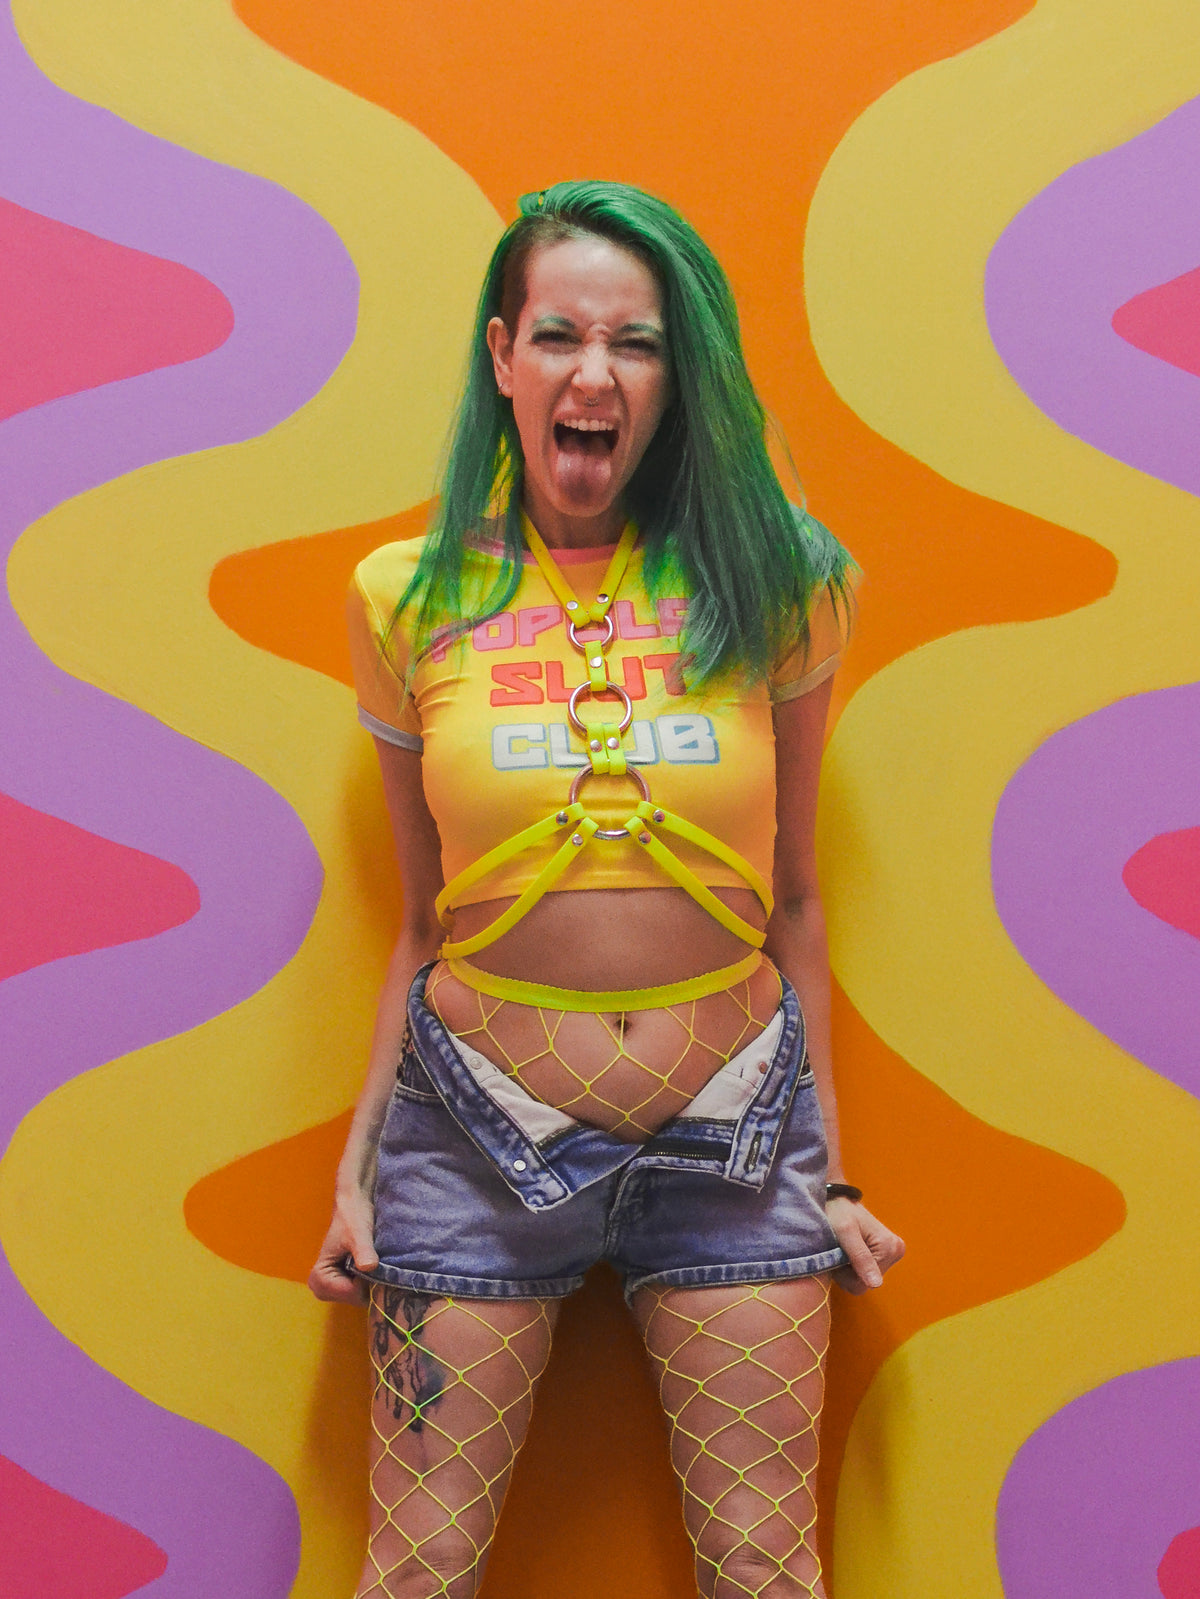 Image of a woman with green hair sticking out her tongue. She is wearing yellow fishnet stockings, short denim shorts, a yellow tshirt, and a neon yellow chest harness.